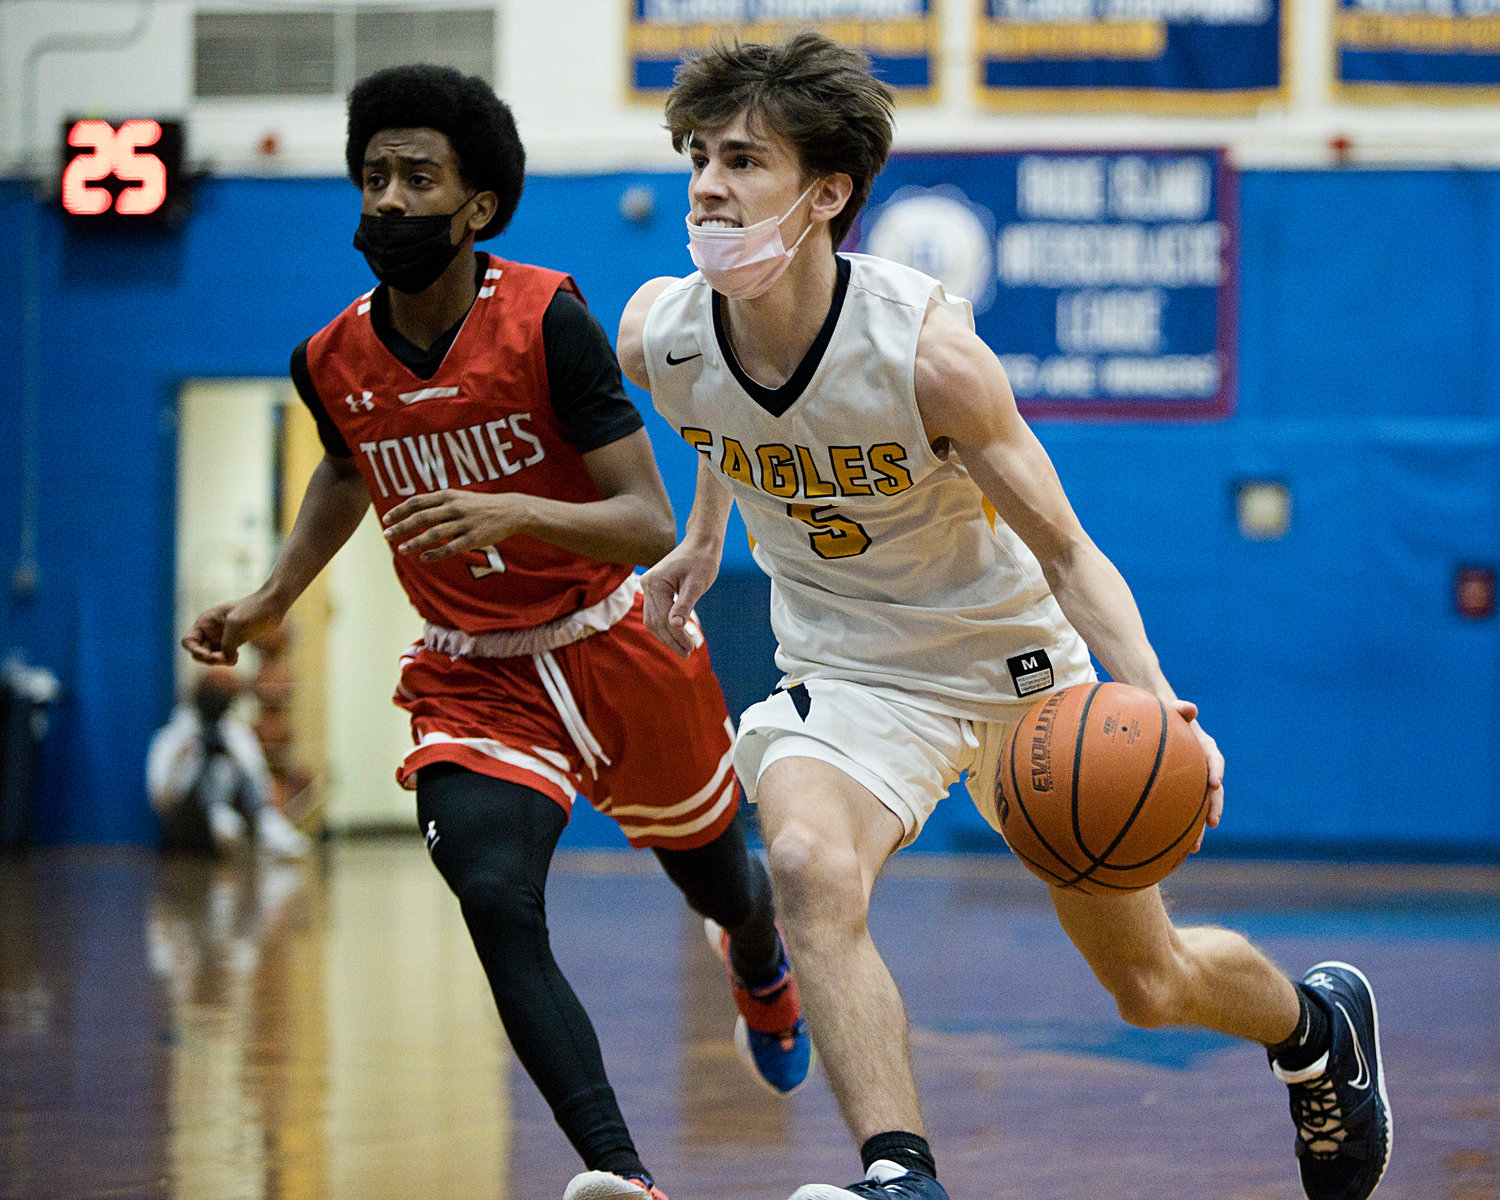 Matt Raffa drives toward the hoop during the first half of Wednesday's game, against East Providence.